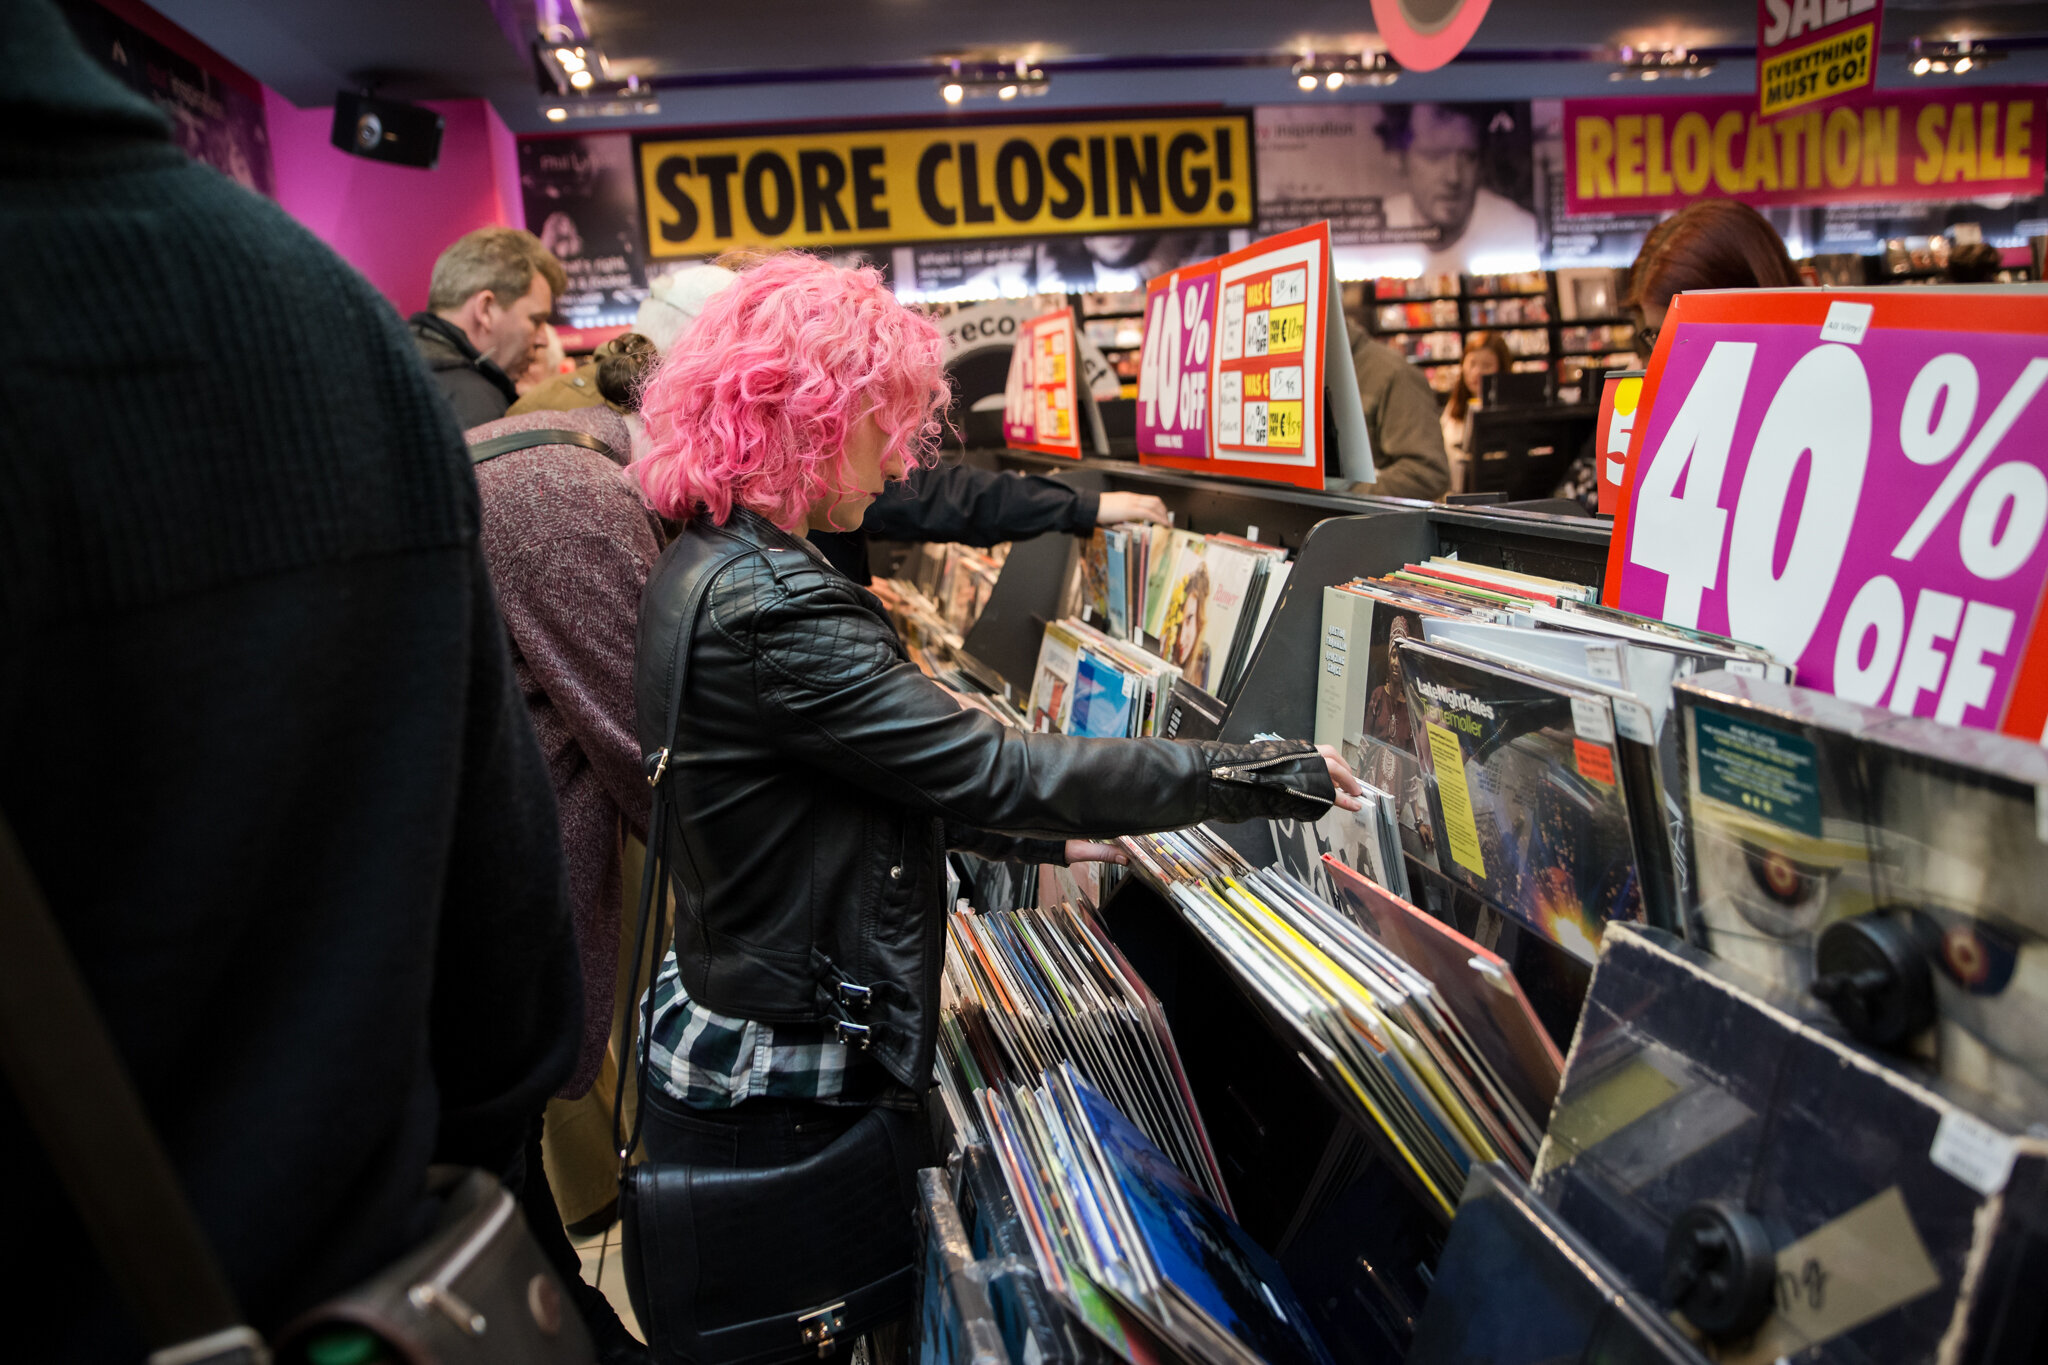 RECORD STORE DAY.